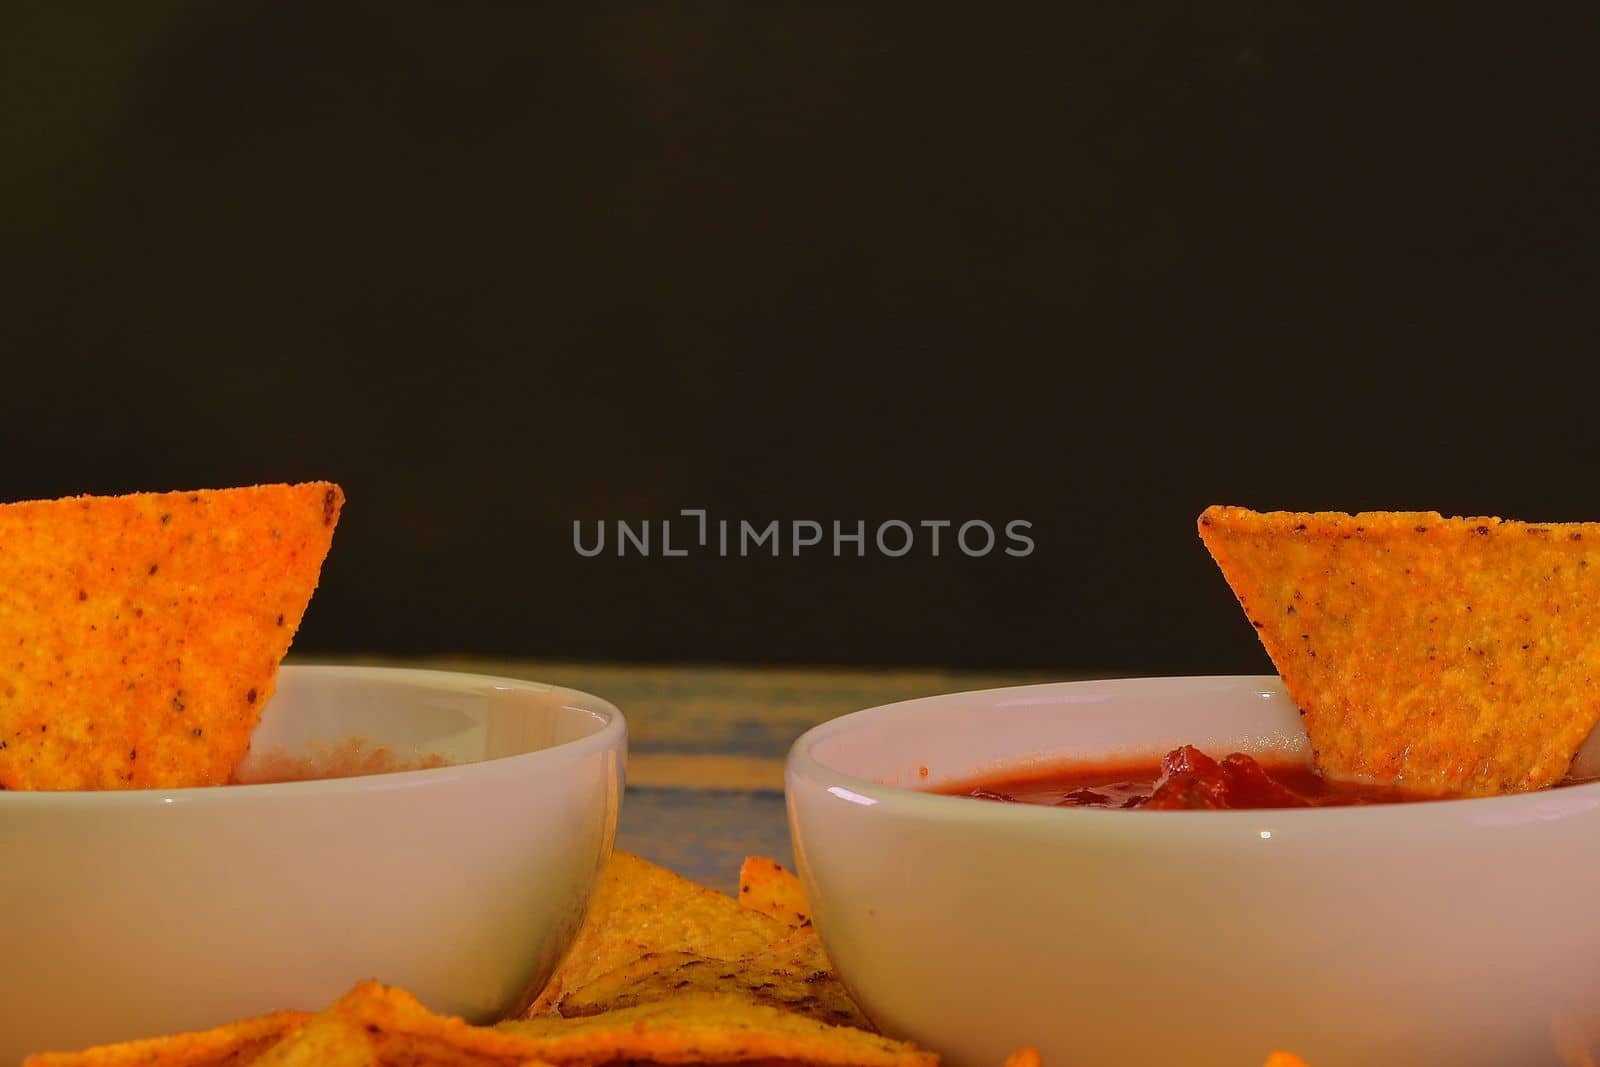 Chili corn-chips with salsa dip on wooden background by roman_nerud